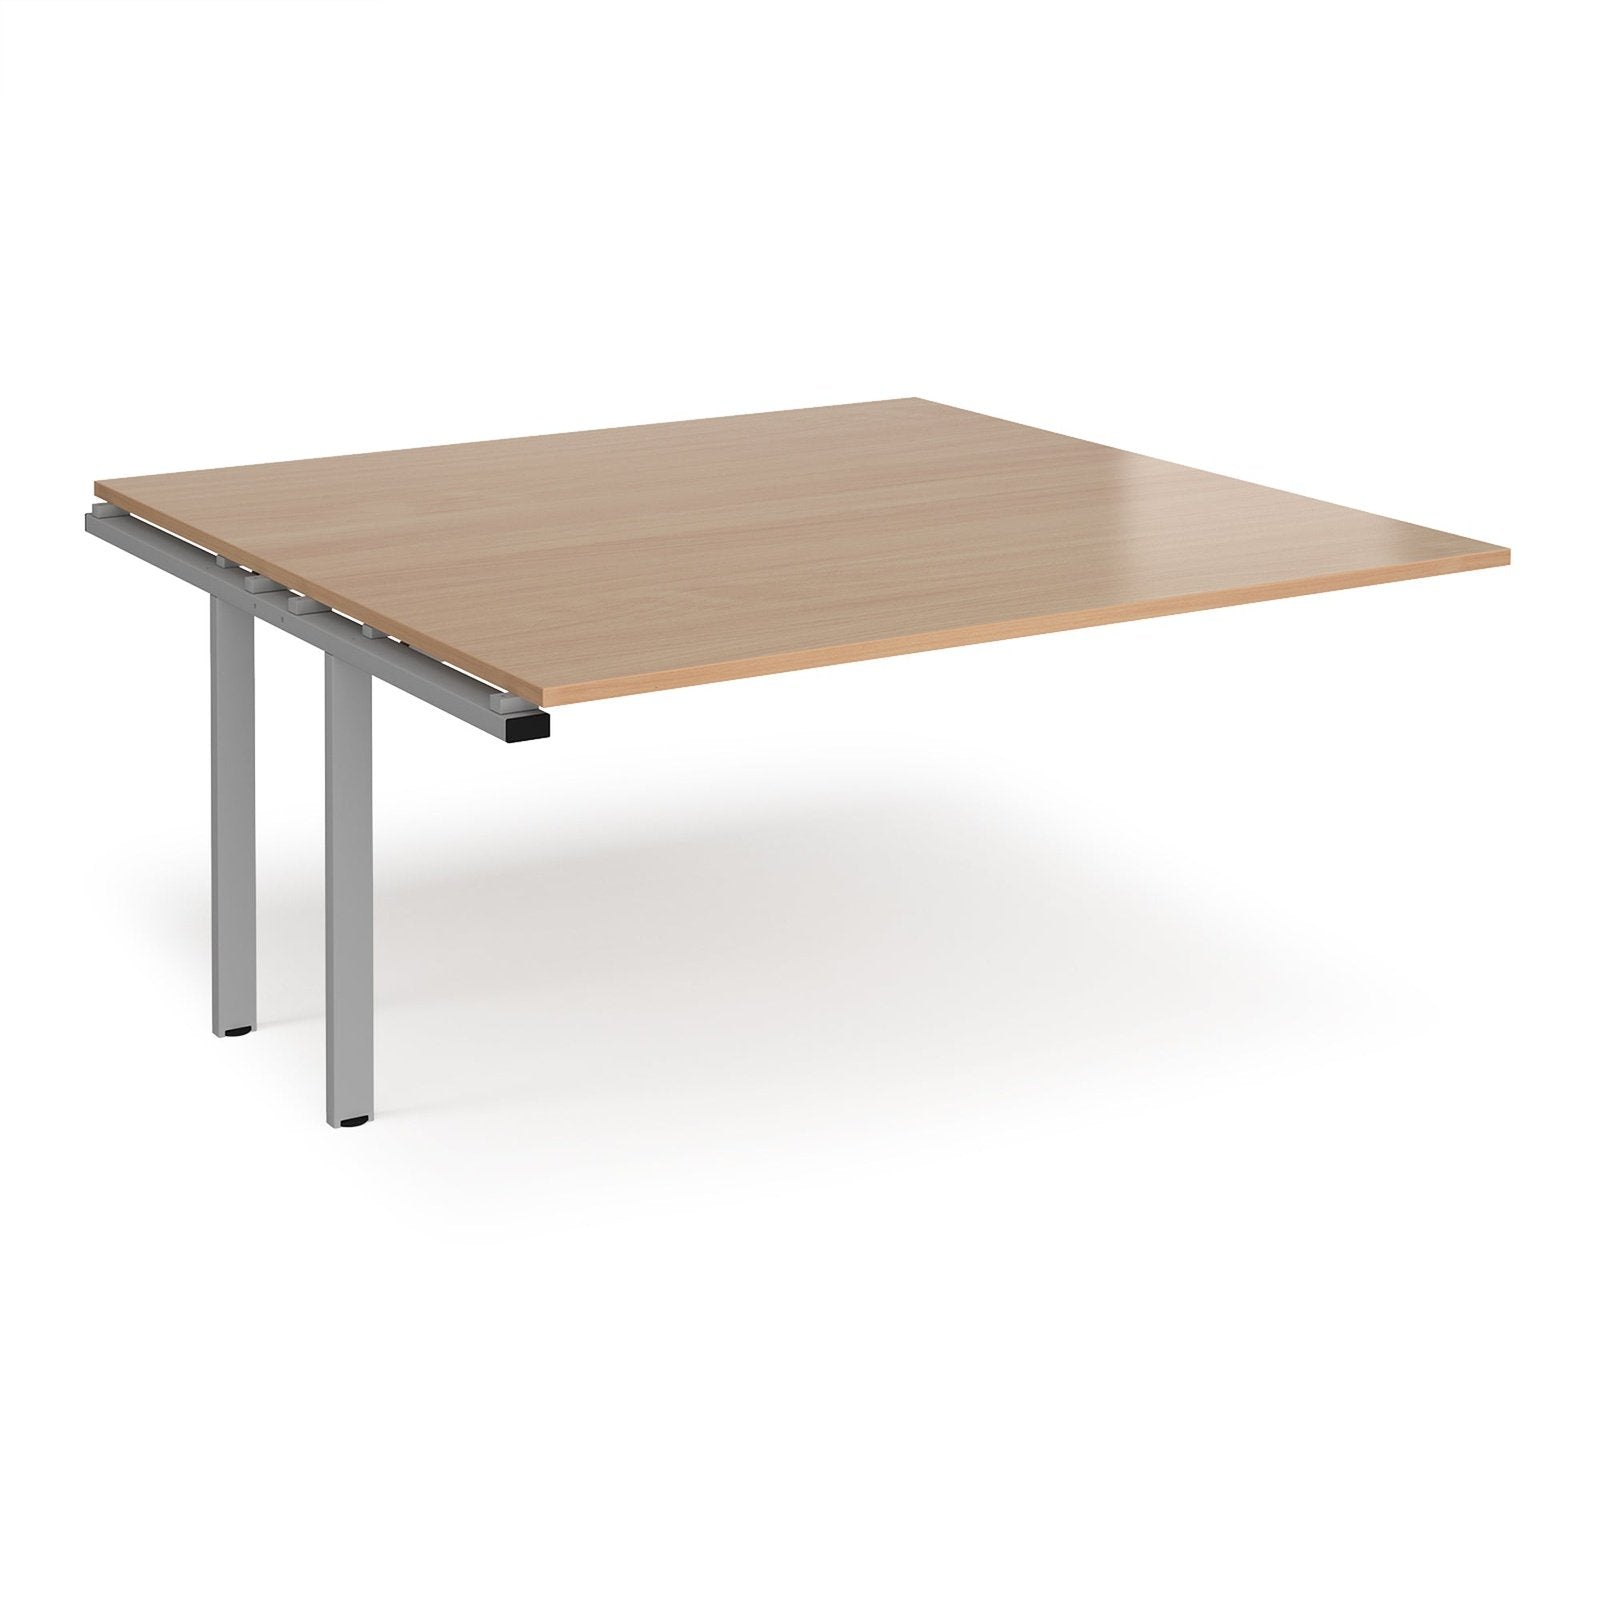 Adapt boardroom table add on unit - Office Products Online